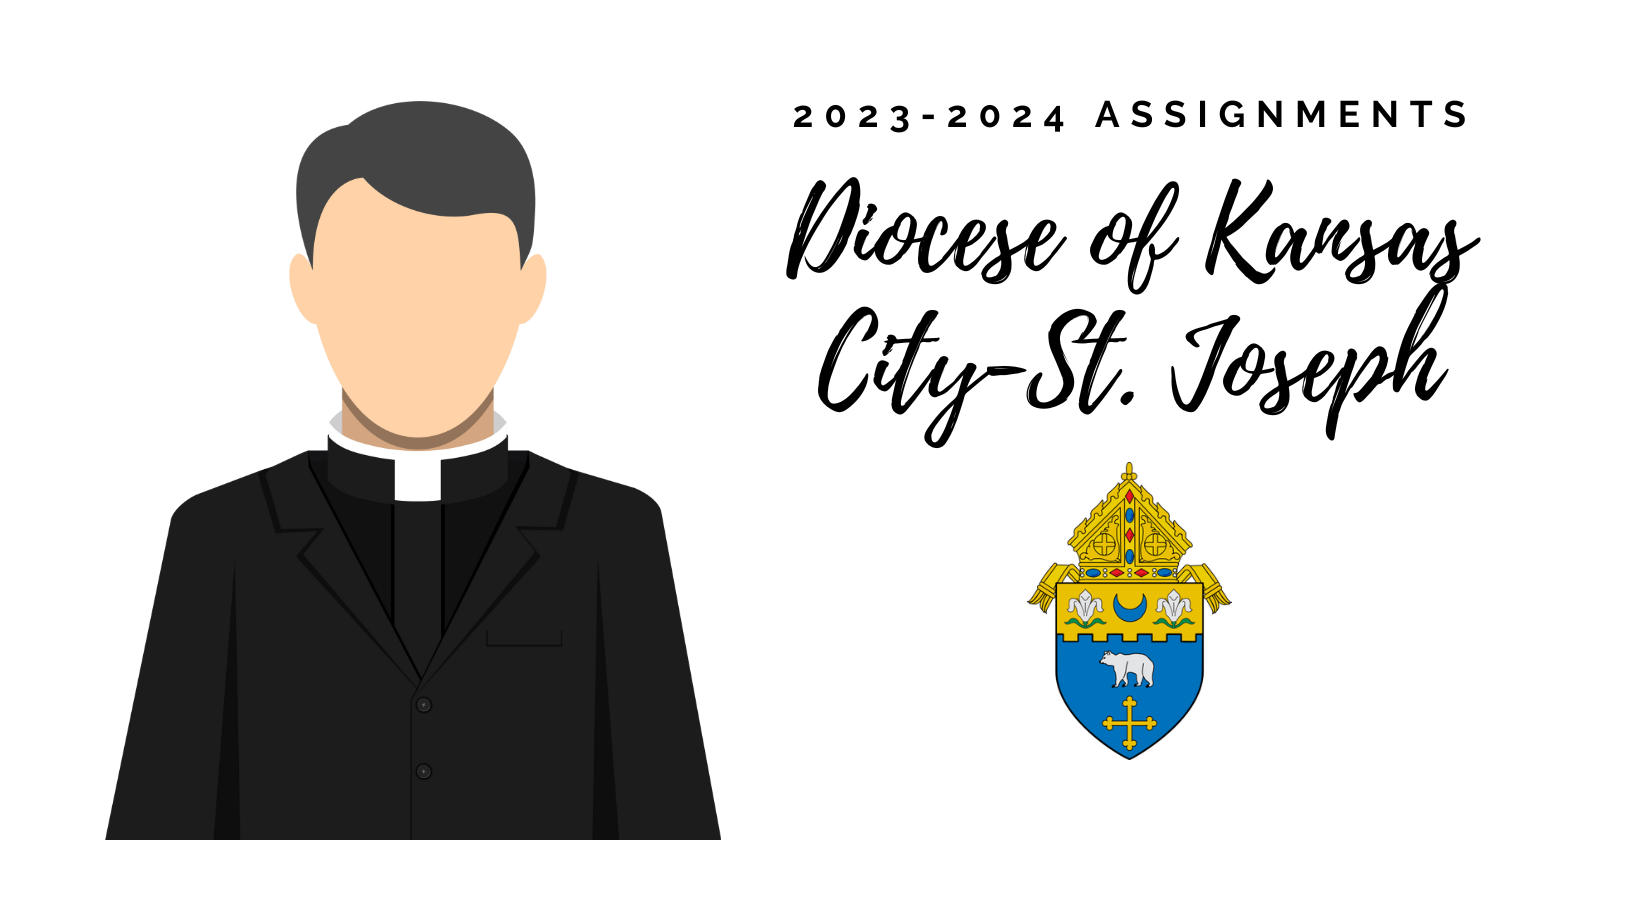 sioux city diocese priest assignments 2022